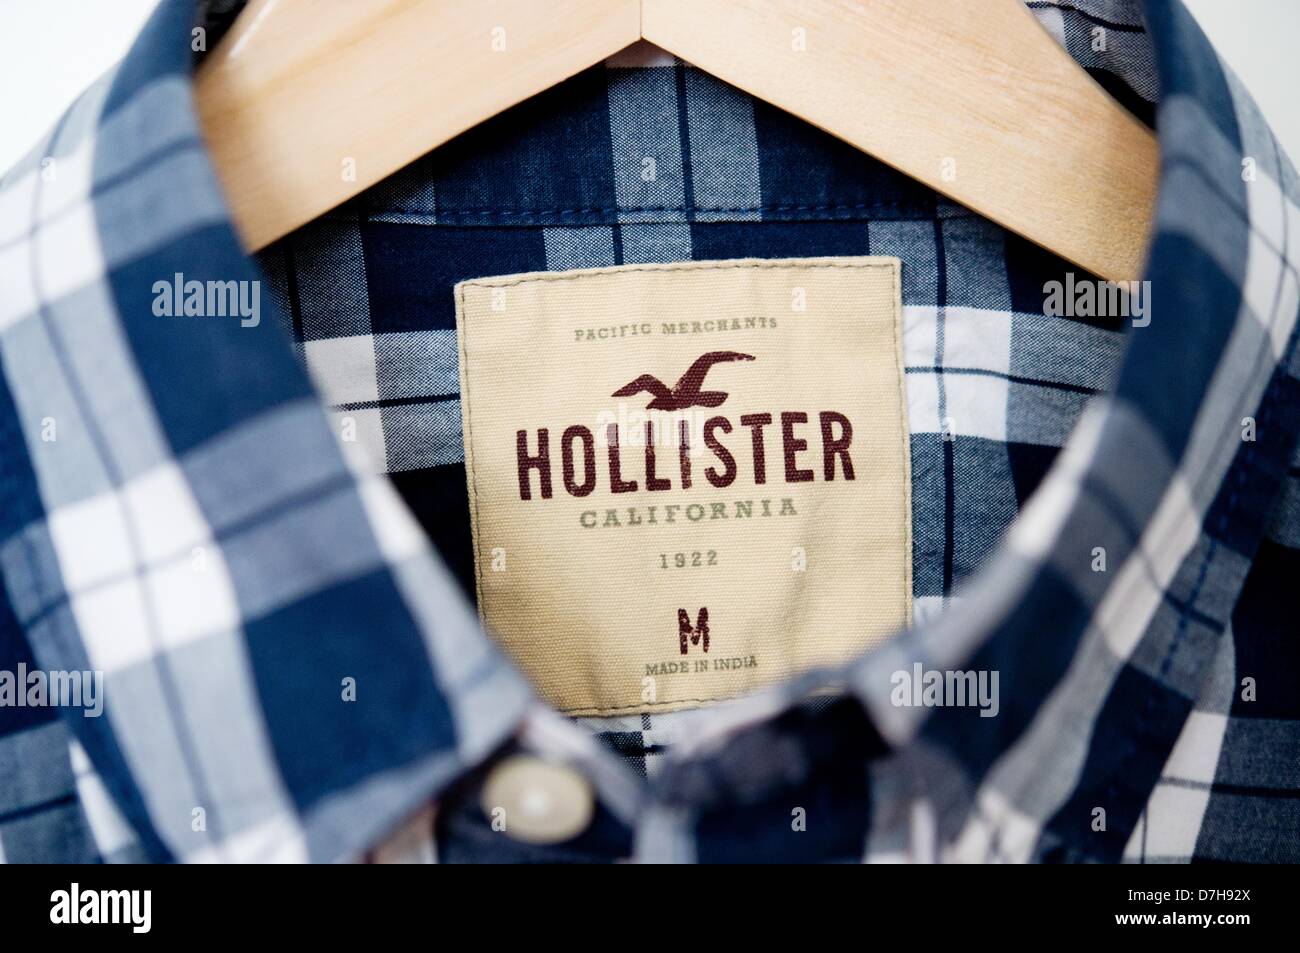 hollister india online store